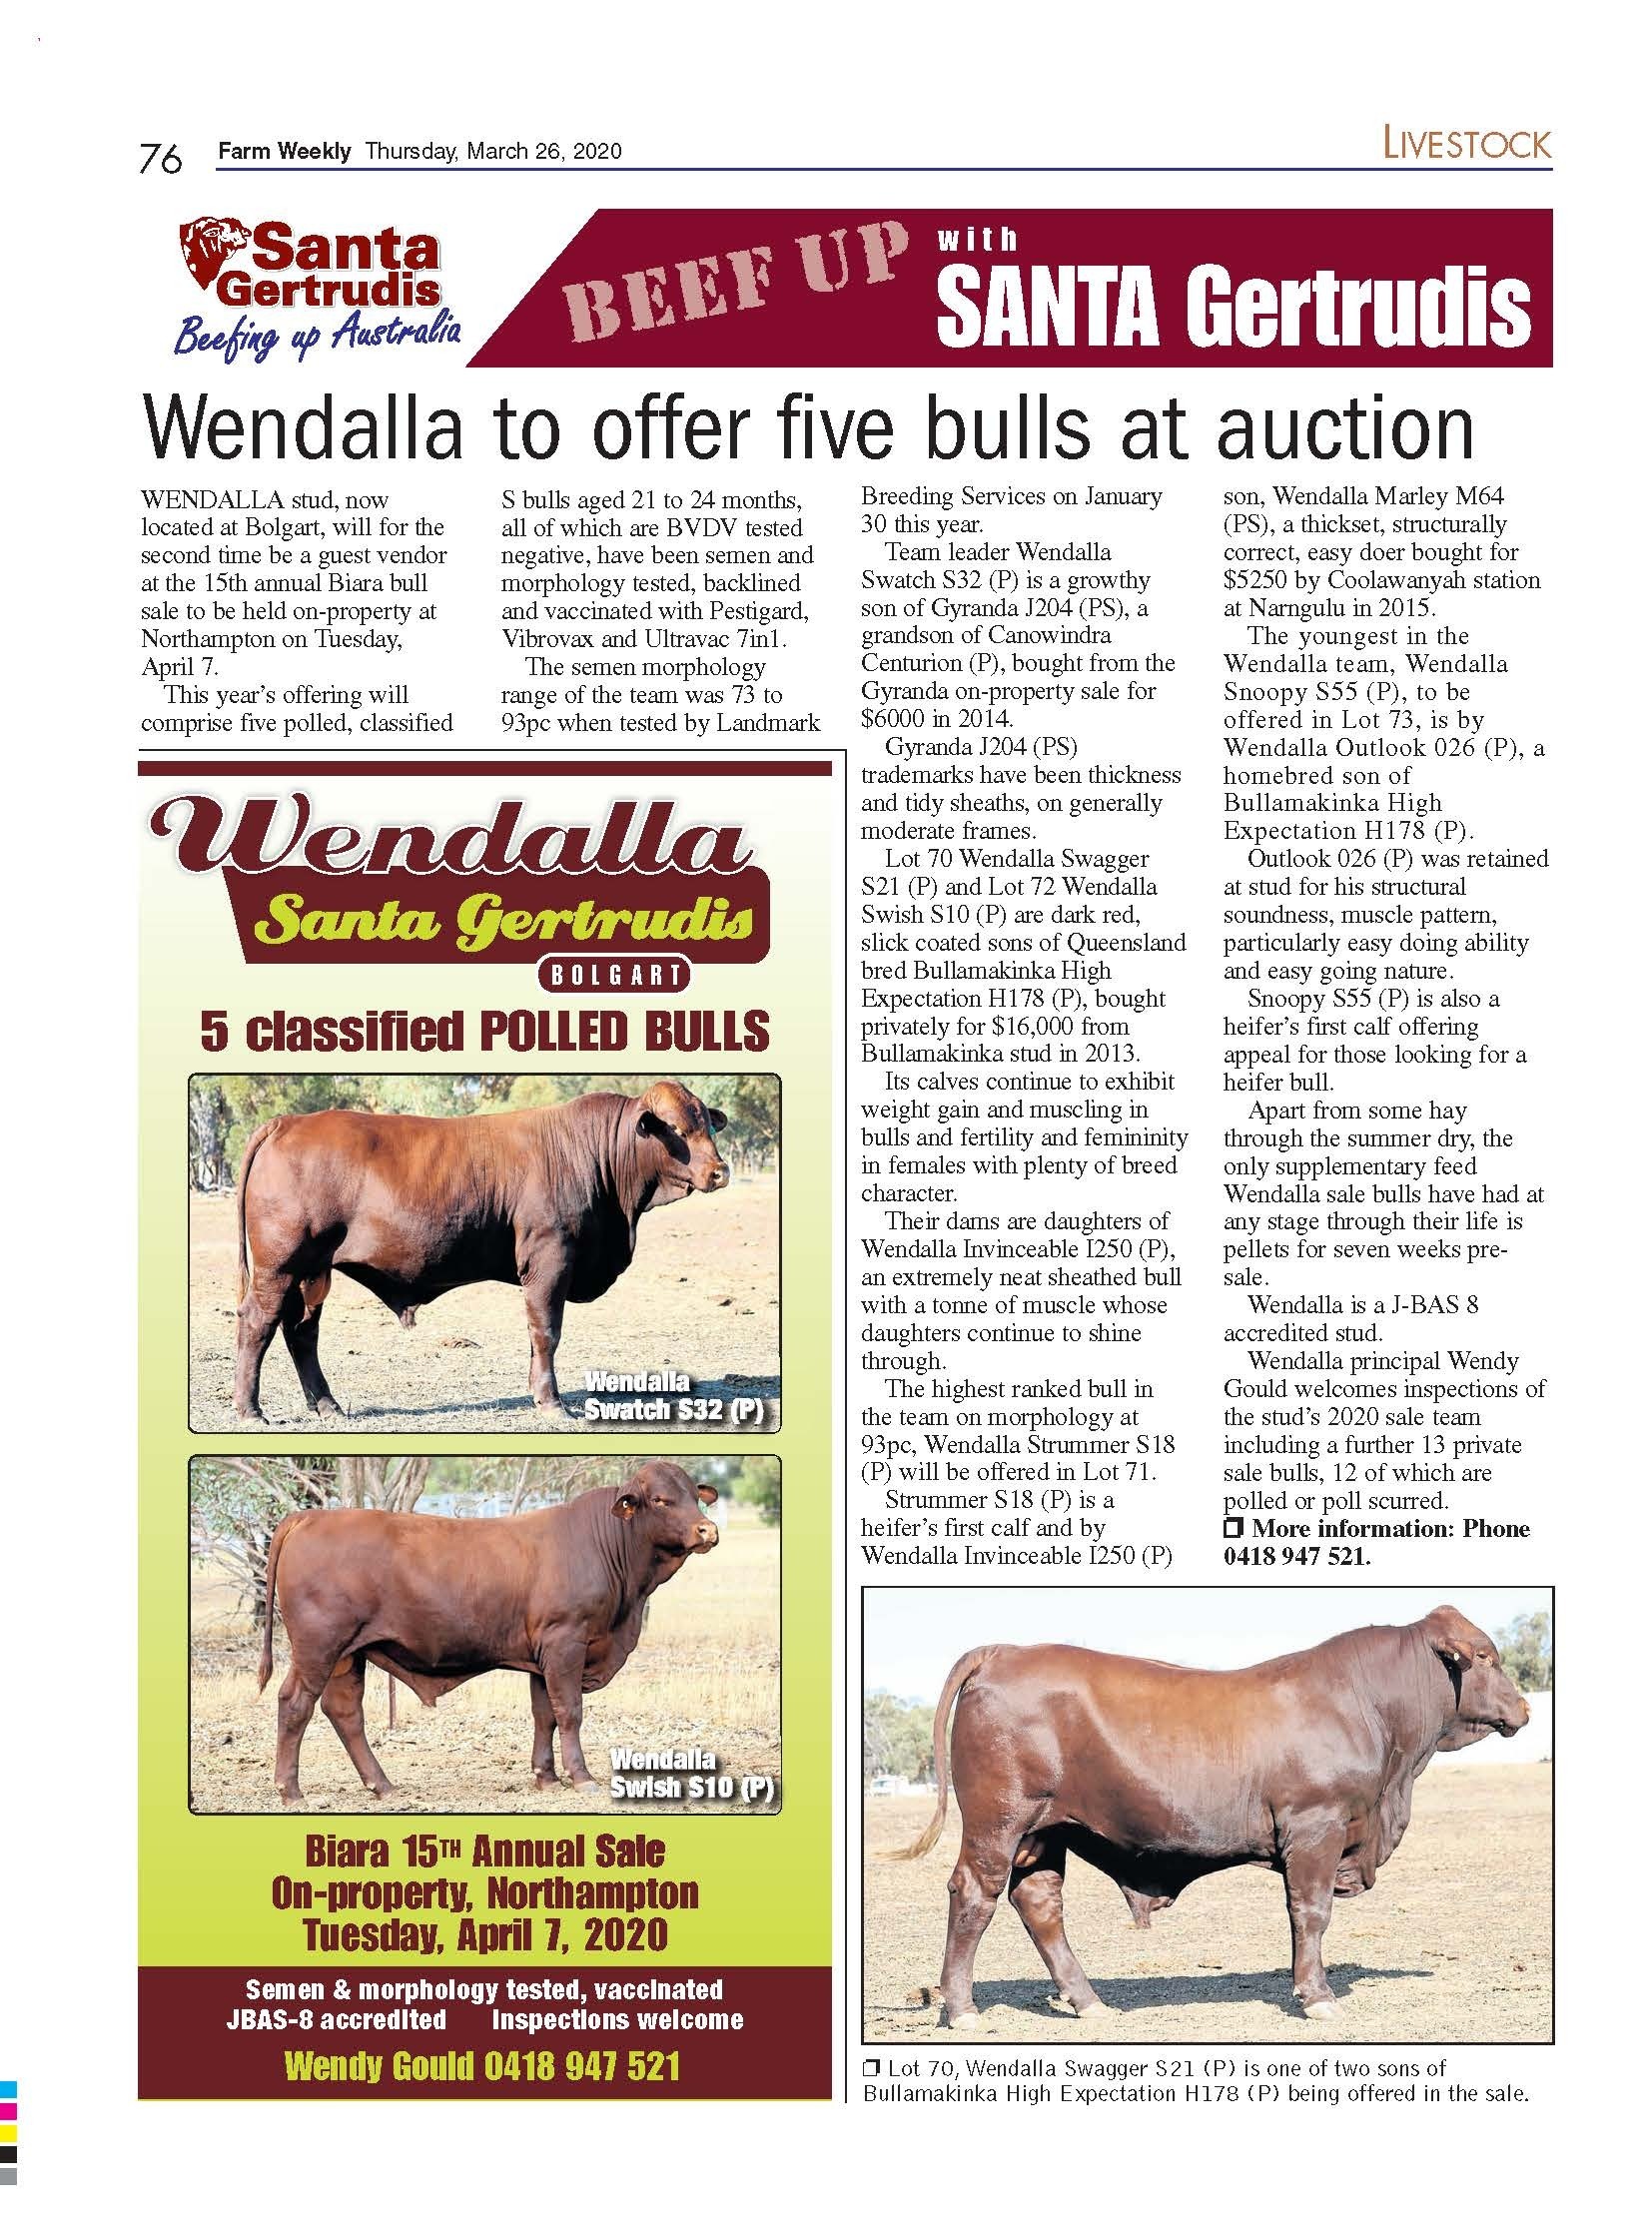 Wendall to offer five bulls at auction